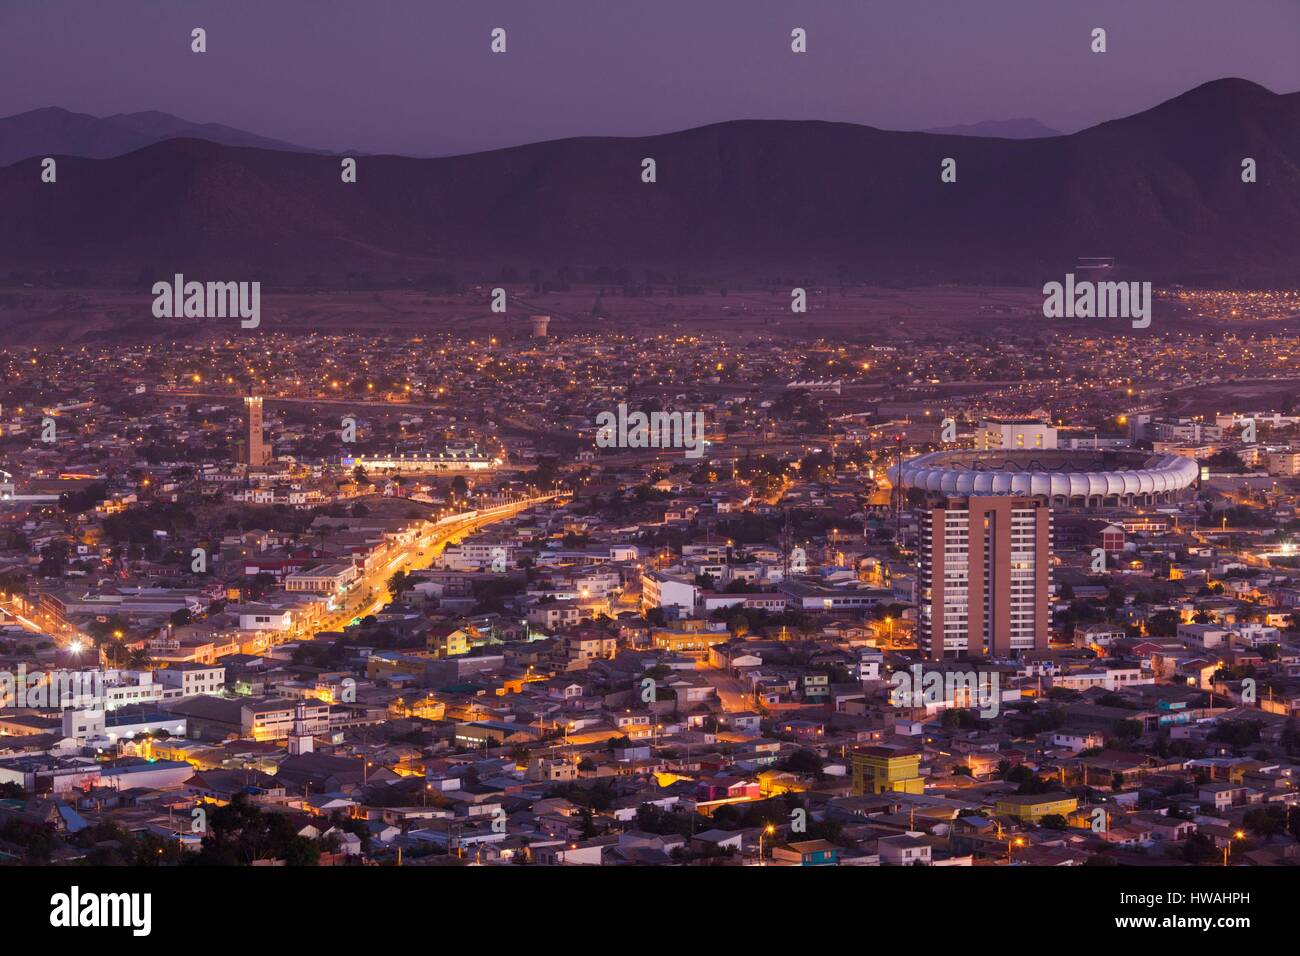 Chile, Coquimbo, elevated city view with Mohammed VI Cultural Center and Sanchez Romoroso Stadium from the Cruz del III Milenio cross, dusk Stock Photo